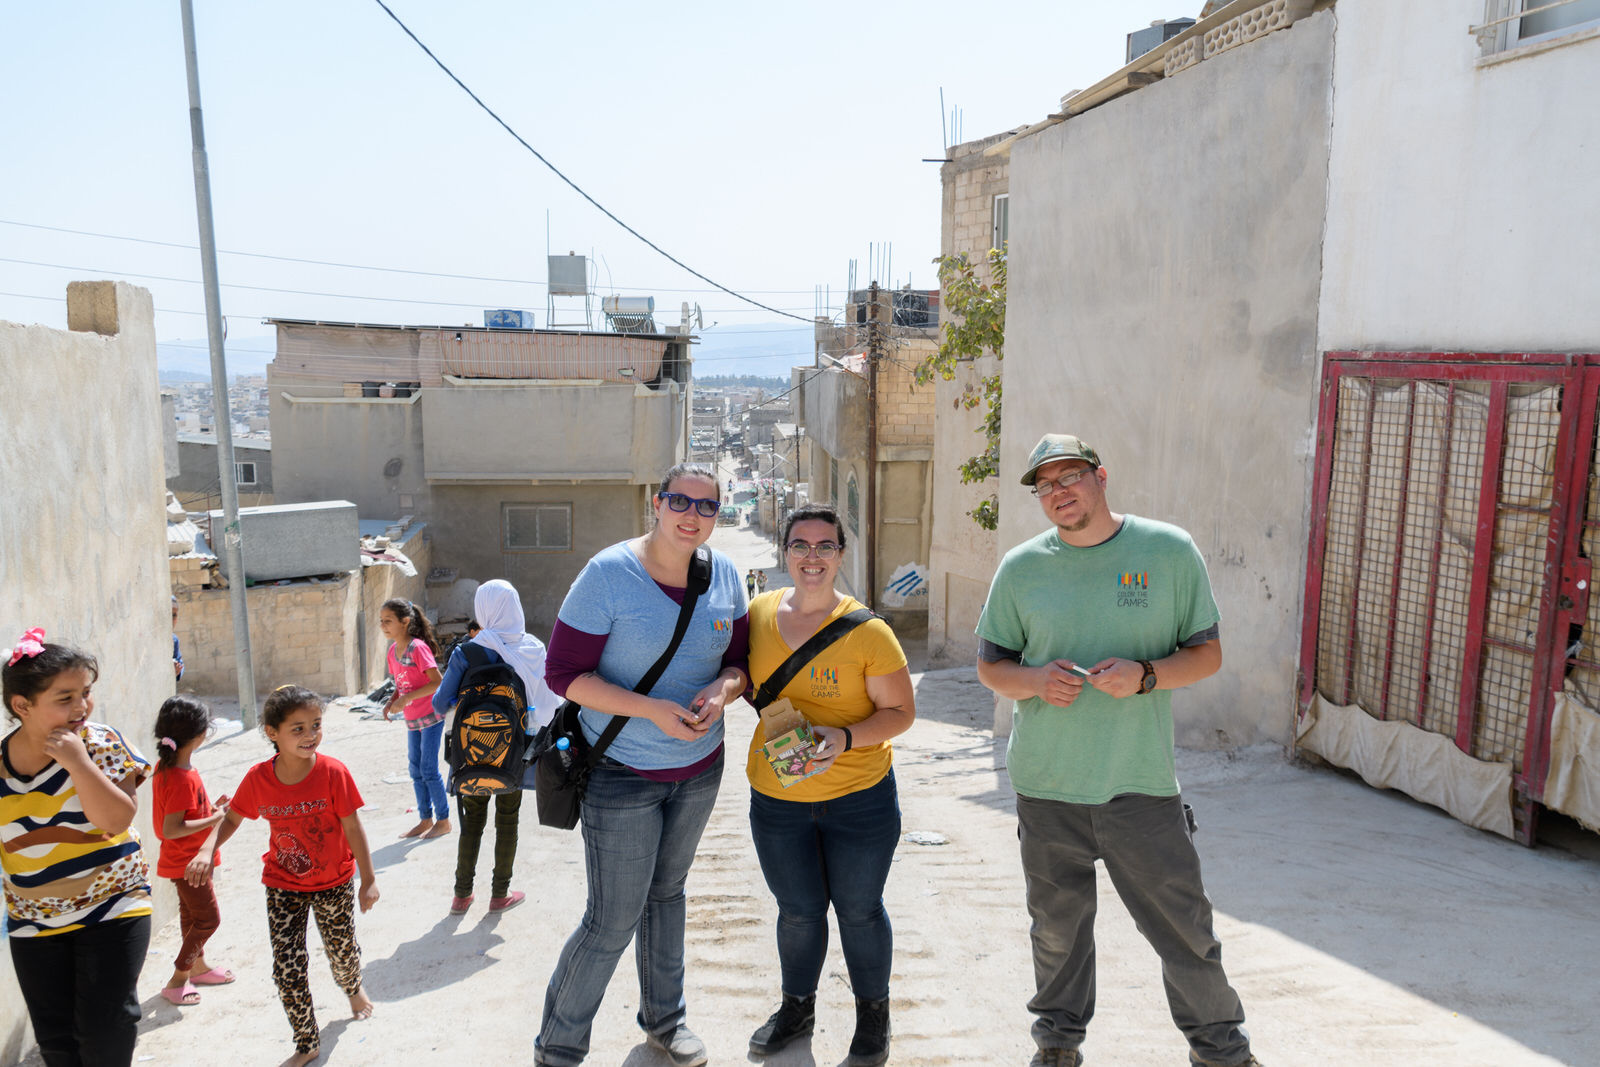 After a successful coloring party the Color The Camps team leave the community center to hand out sidewalk chalk to children in the streets of Jerash refugee camp.